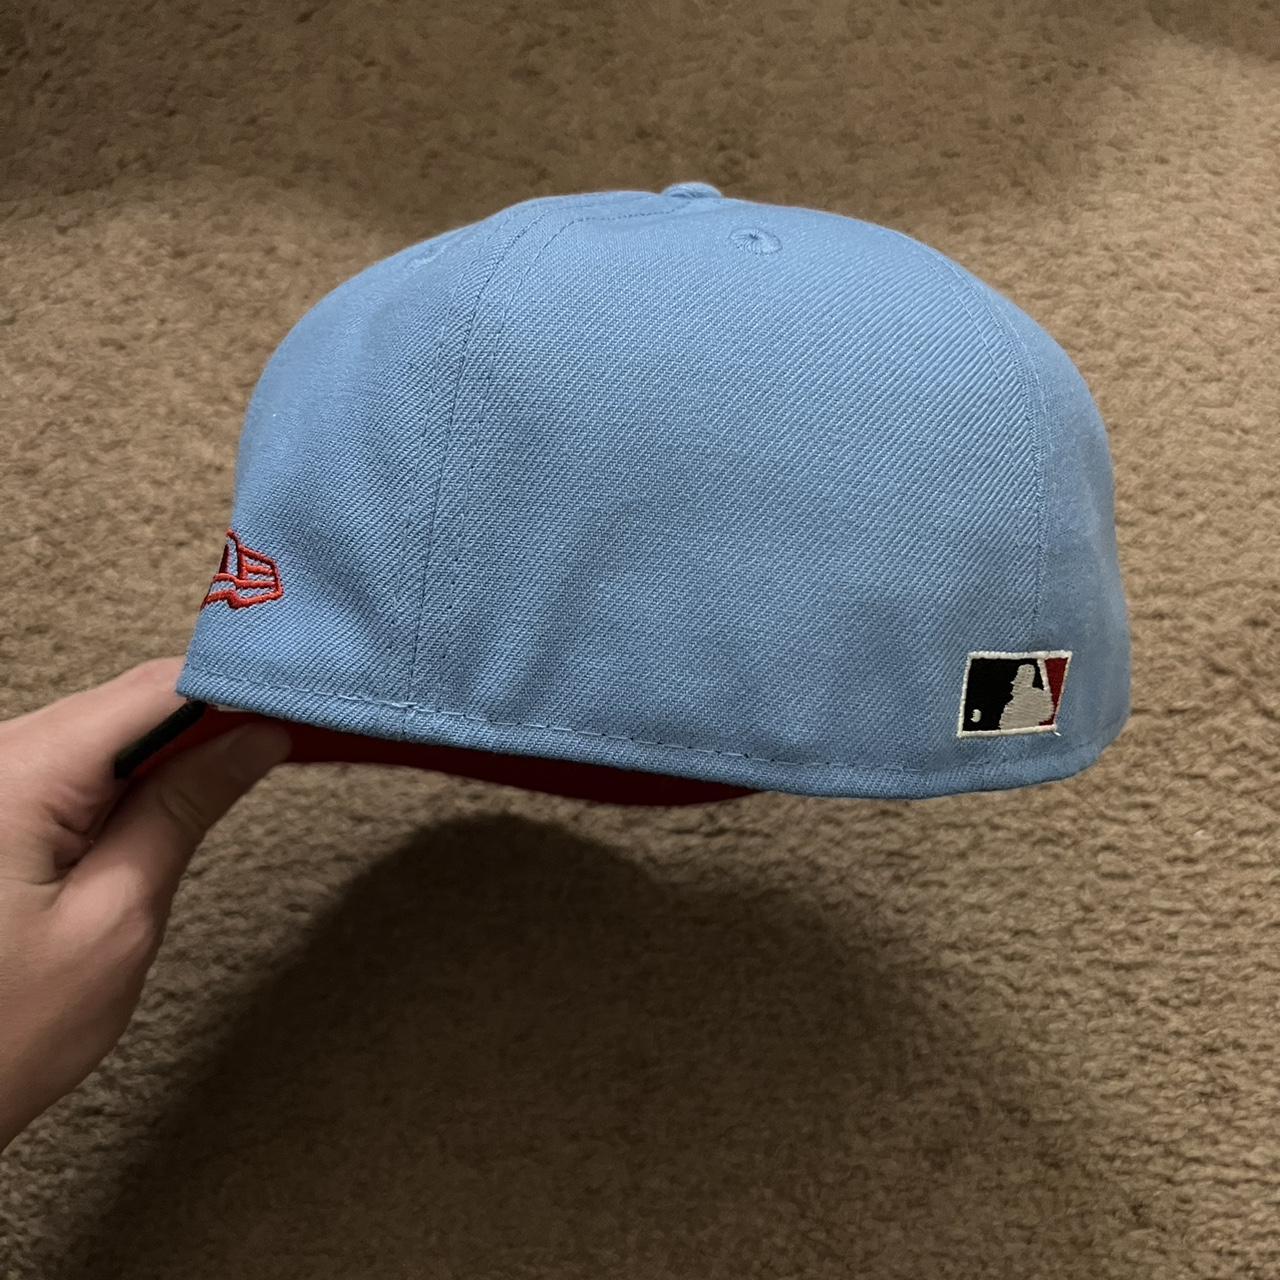 New Era Men's Blue and Red Hat (3)